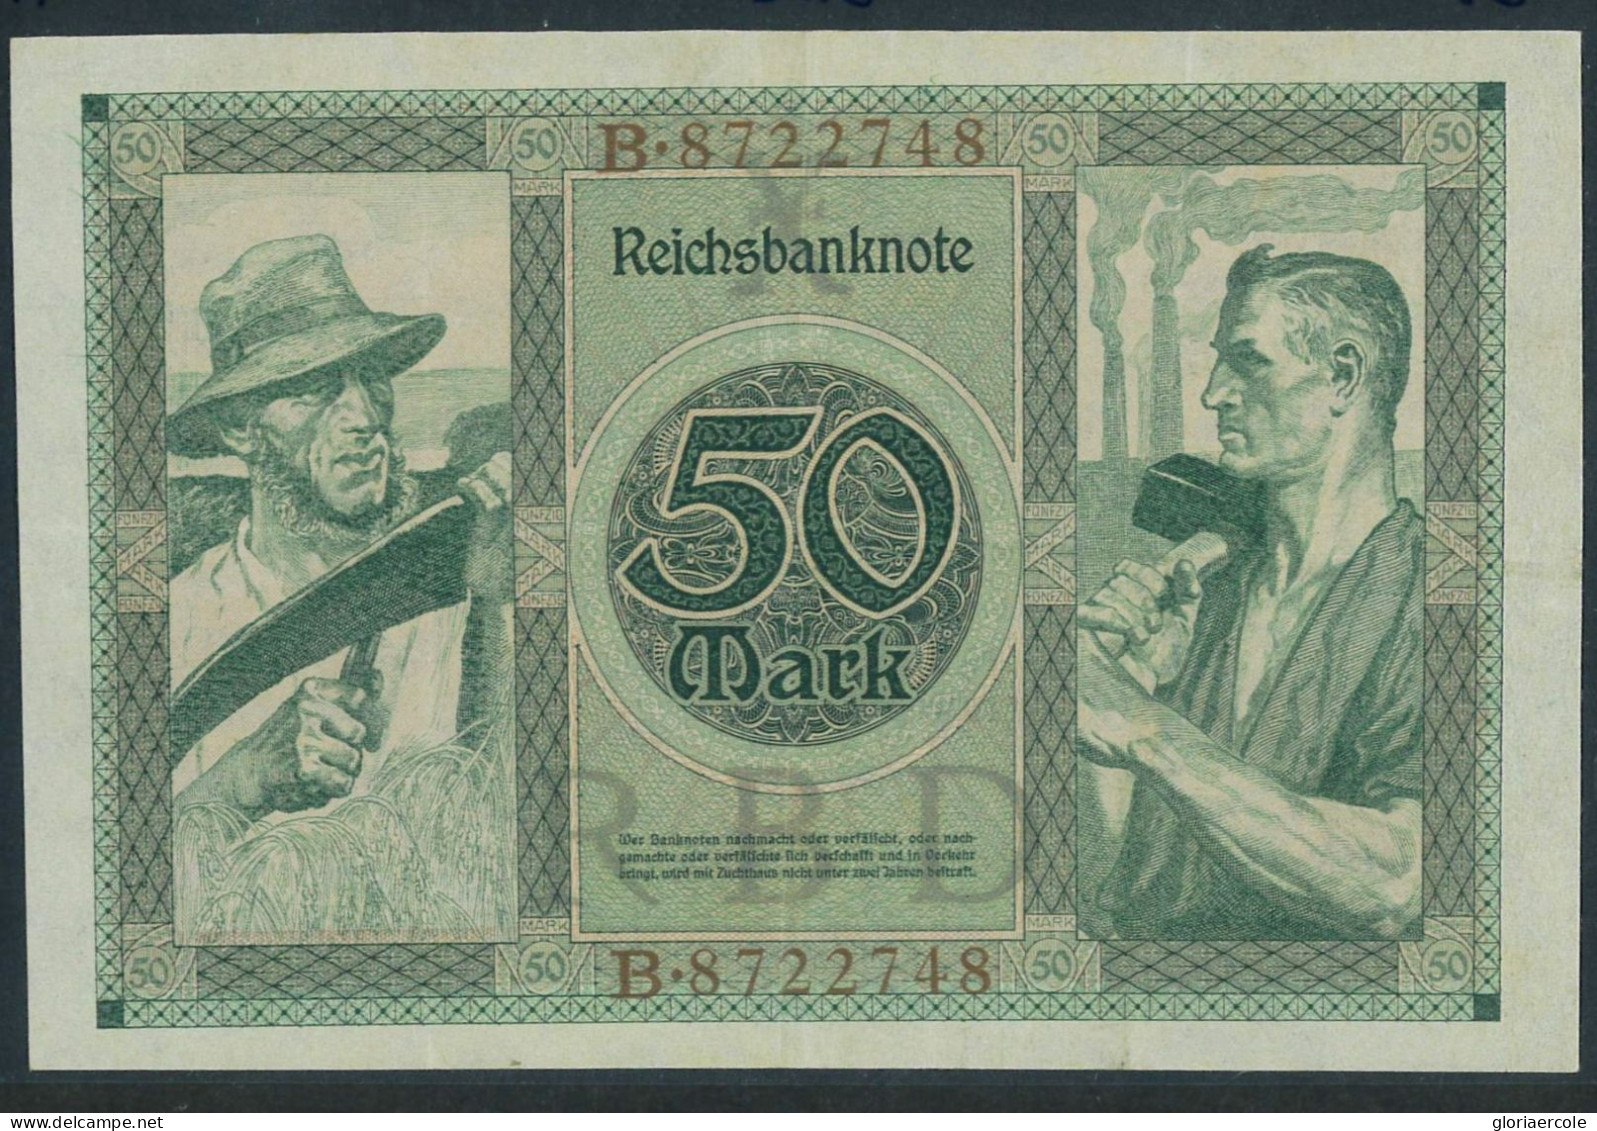 P2753 - GERMANY PAPER MONEY CAT. NR. 68 ALMOST UNCIRCULATED, VERY FINE - Ohne Zuordnung